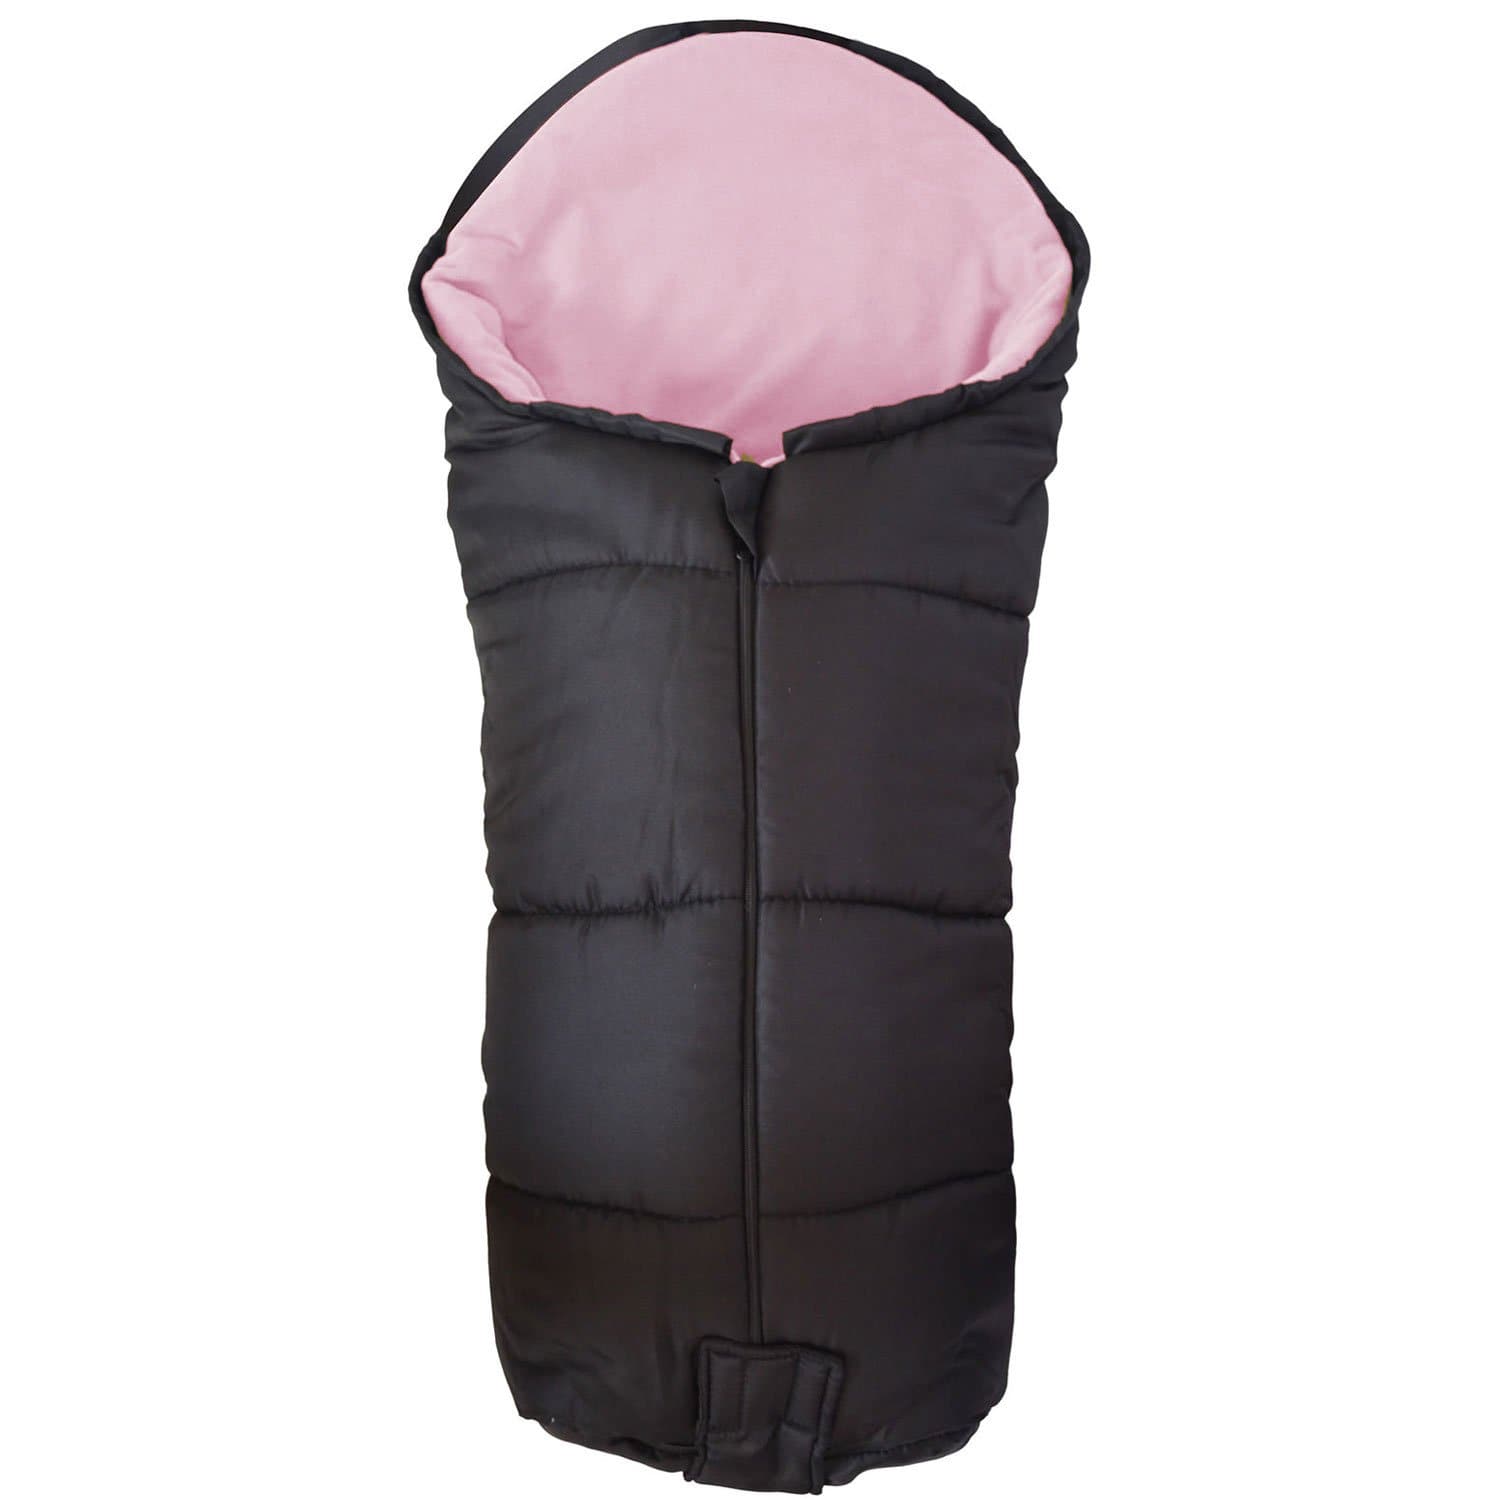 Deluxe Footmuff / Cosy Toes Compatible with Little Shield - Light Pink / Fits All Models | For Your Little One